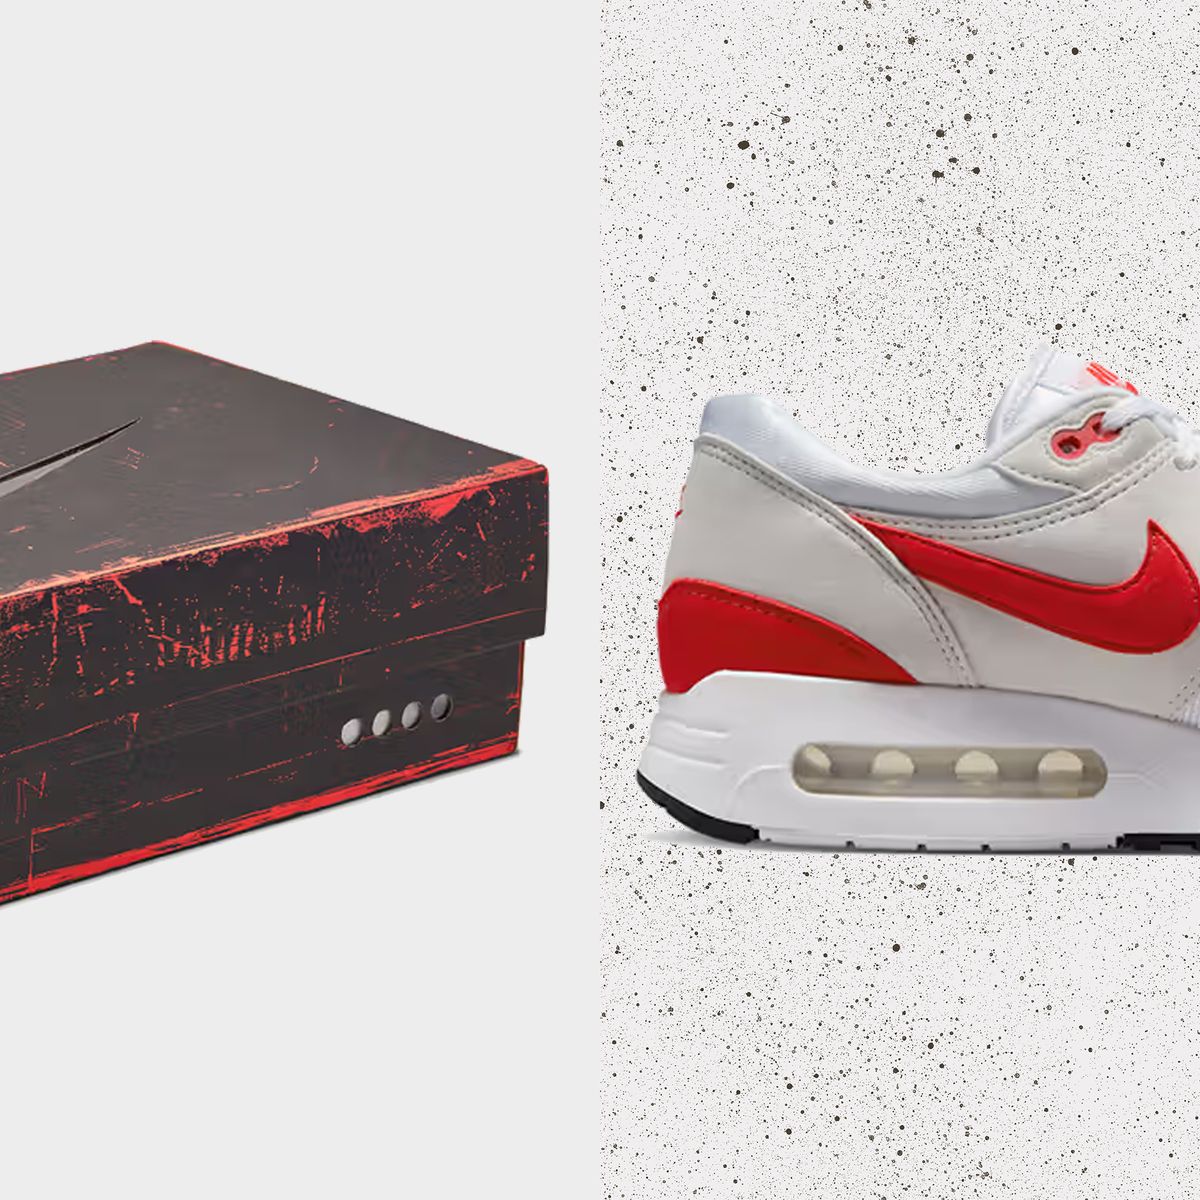 Fantástico televisor Acurrucarse Air Max Day 2023: What You Need to Know About the Nike Event